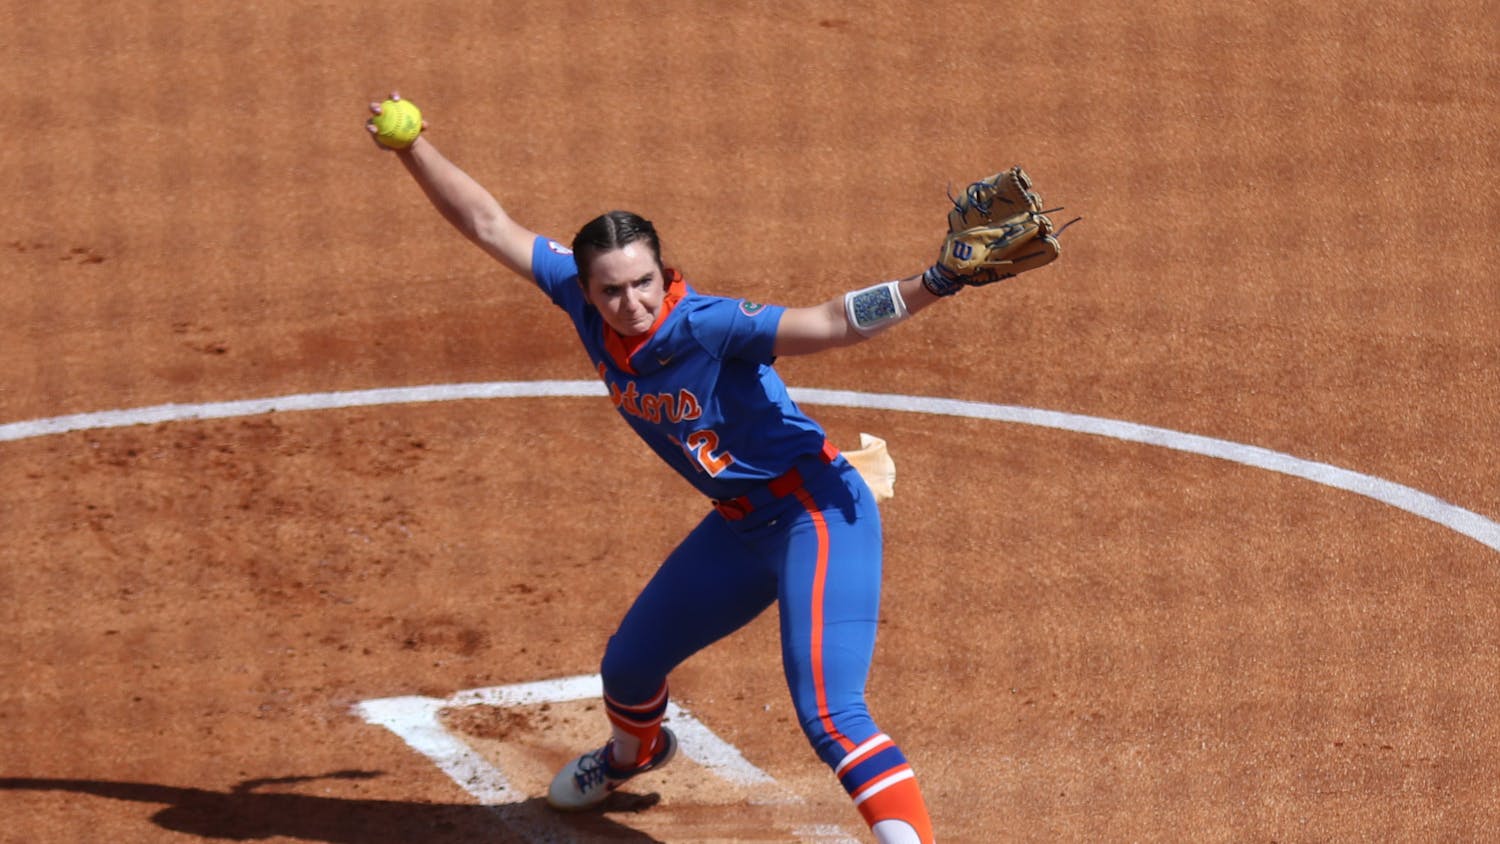 Florida's Elizabeth Hightower pitches against Louisville on February 27. Hightower tossed her first career no-hitter against South Florida Sunday to help propel Florida to the Super Regional against rival Georiga.